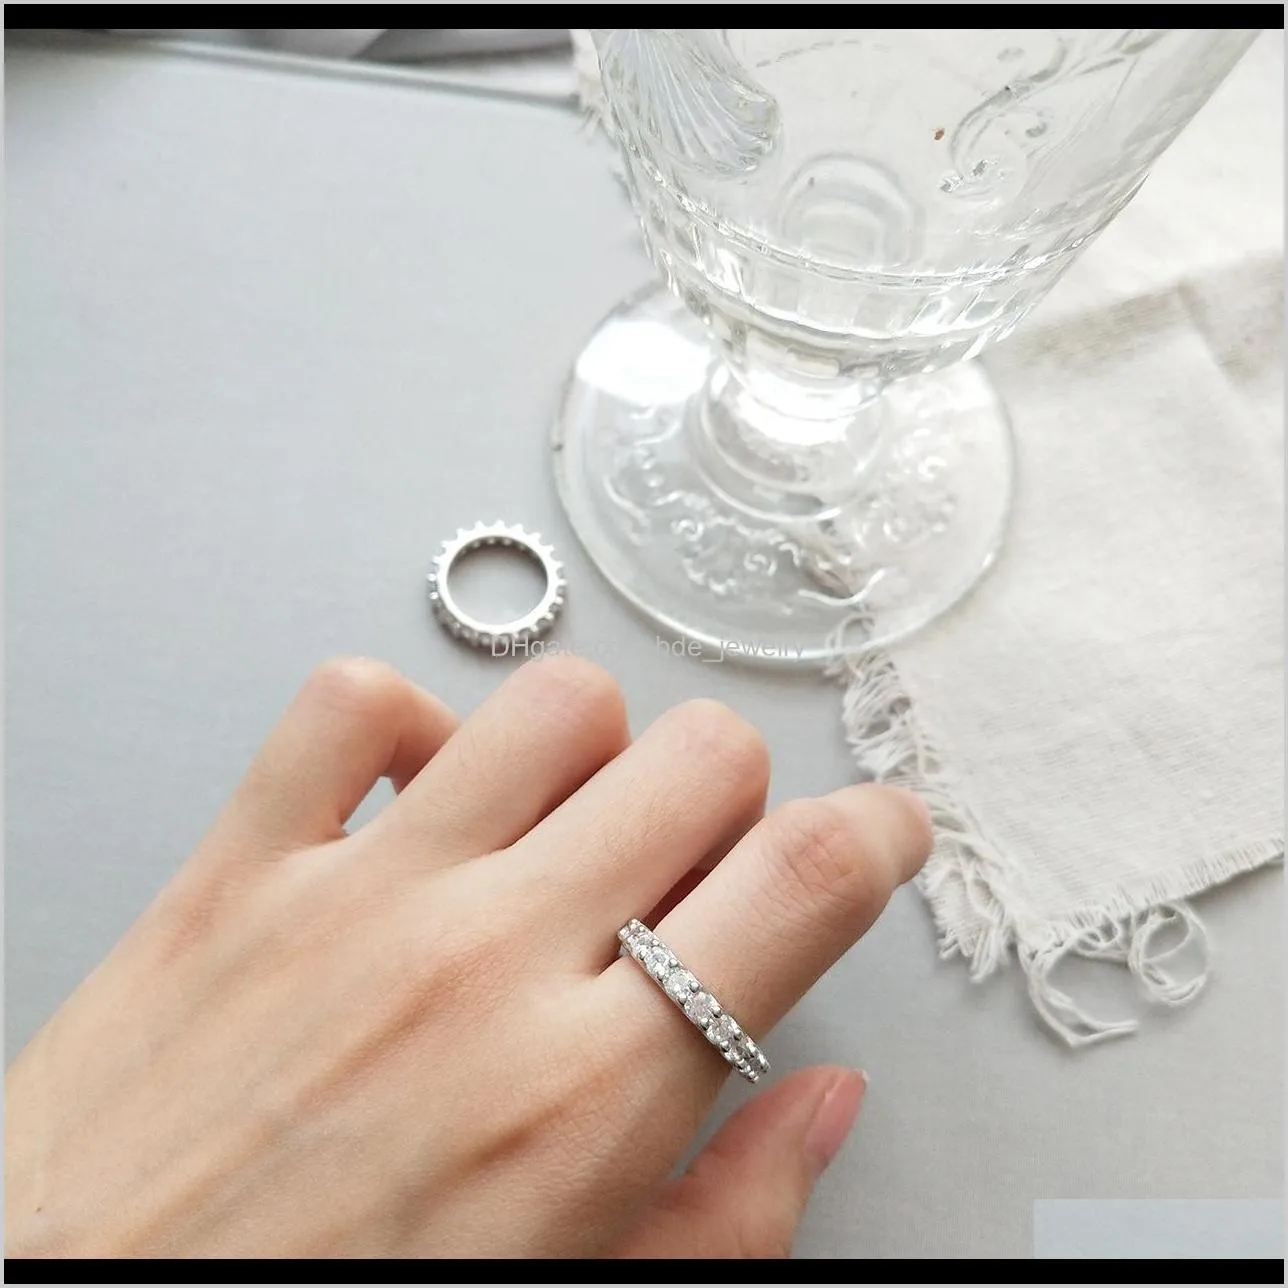 new design 925 sterling silver vintage jewelry minimalism handmade designer women`s band rings with white stones japanese south korea